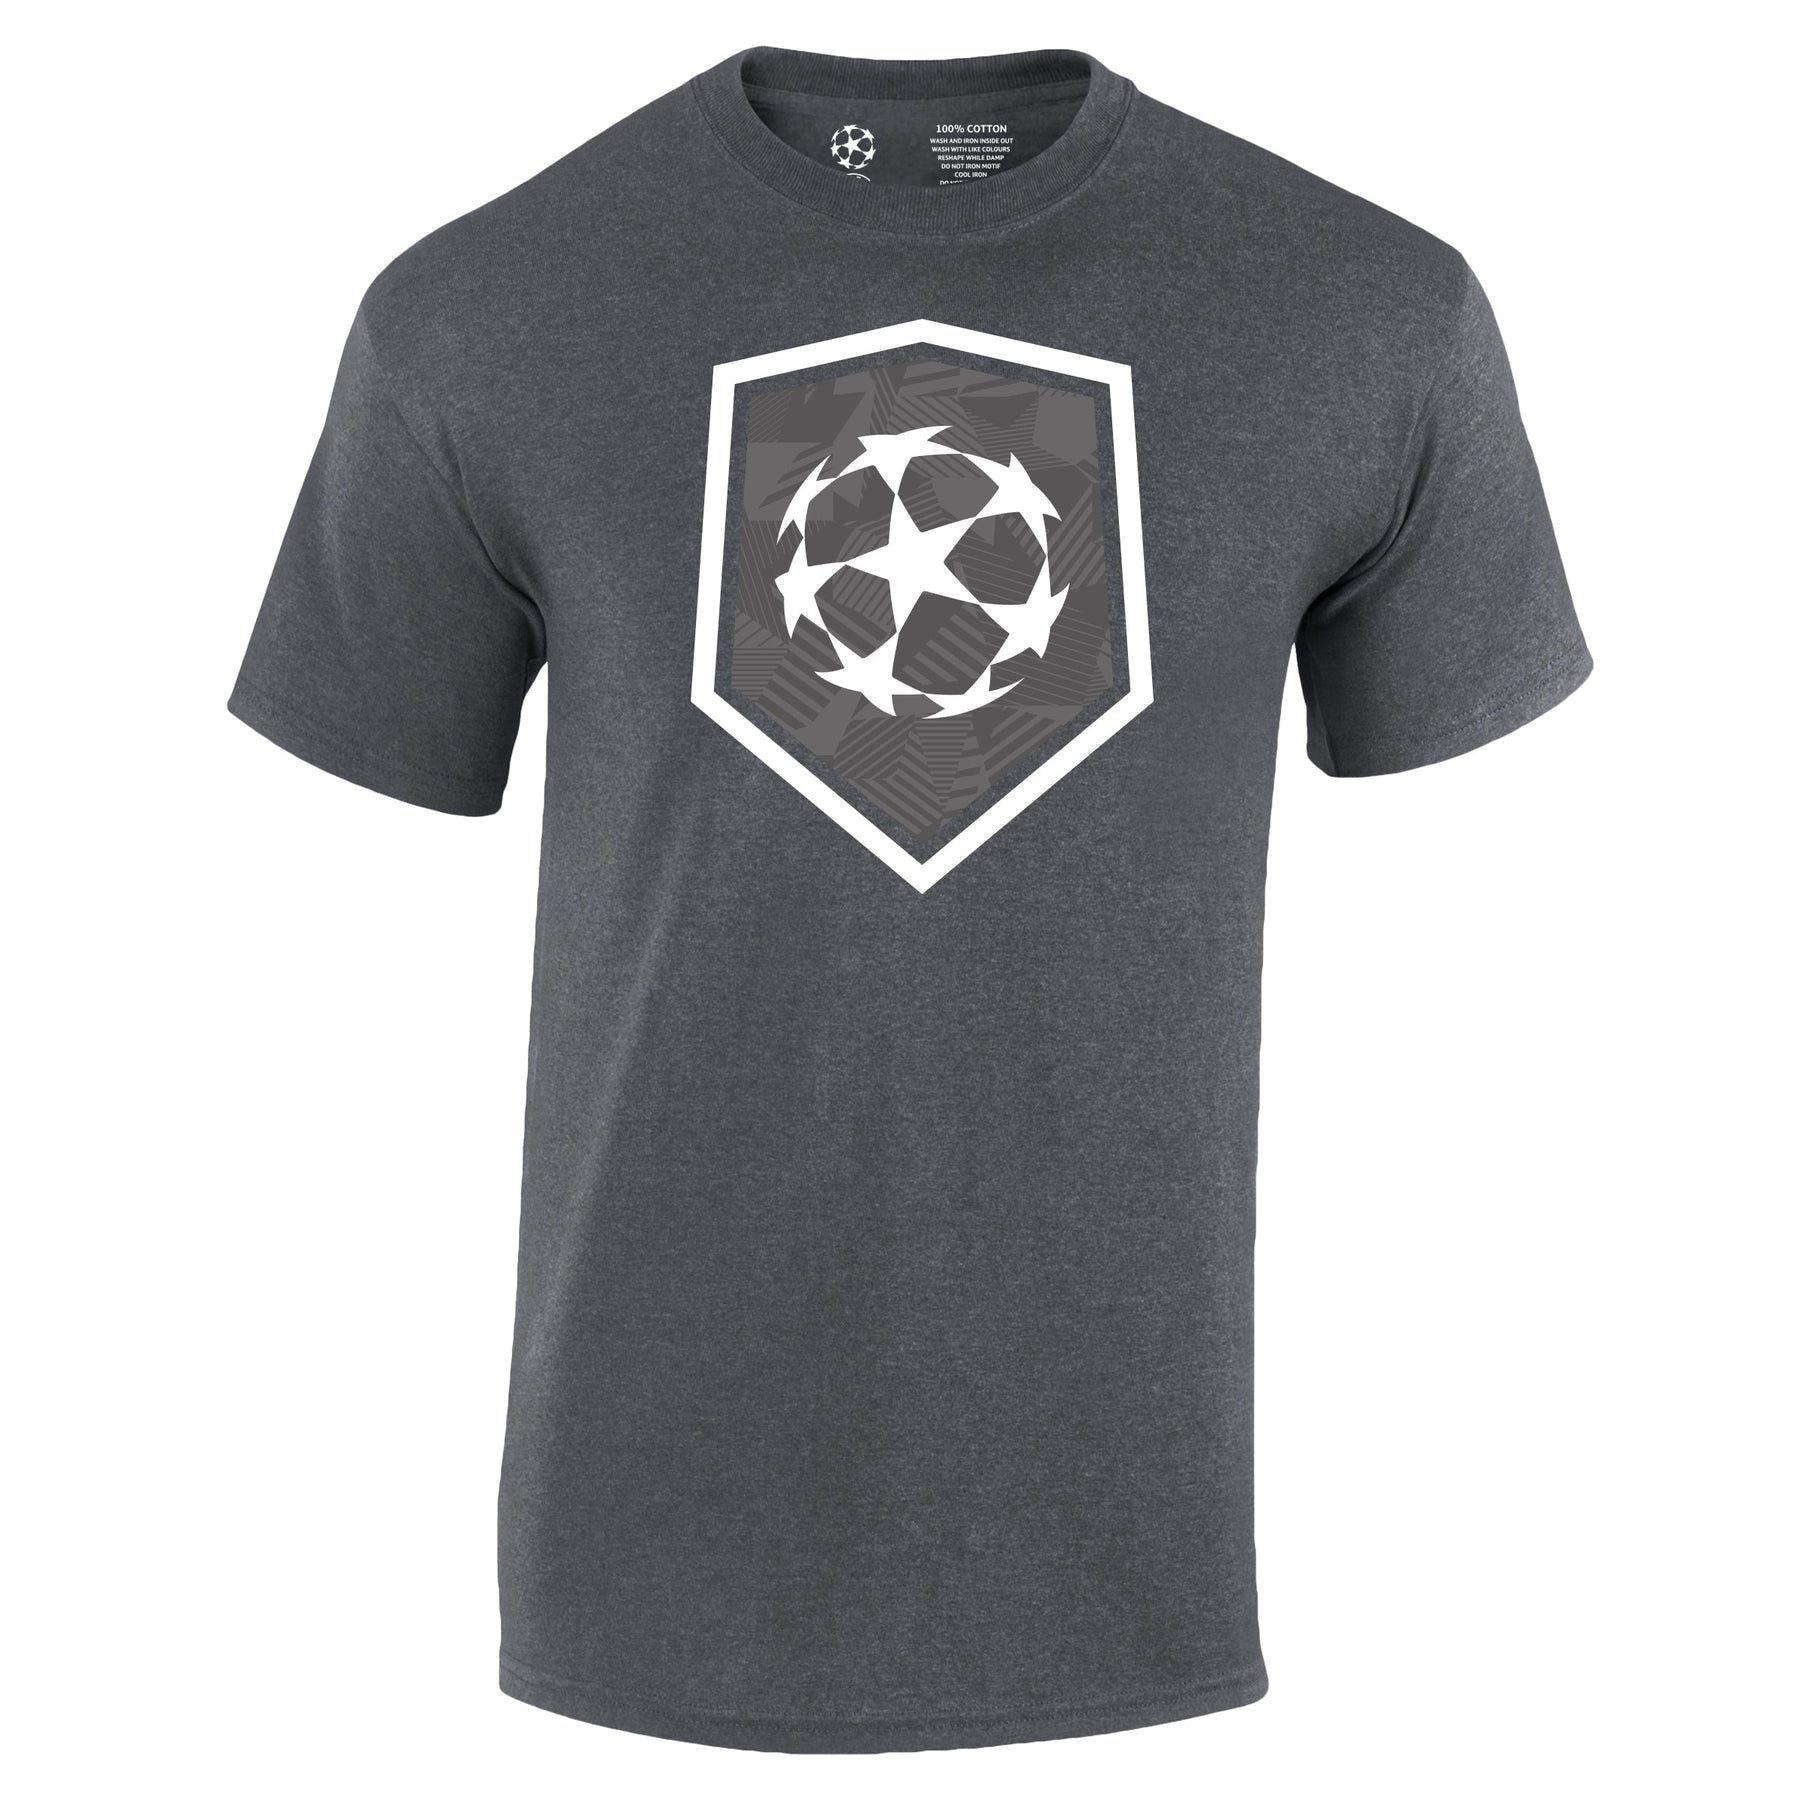 Champions League Starball Shield T-Shirt Charcoal